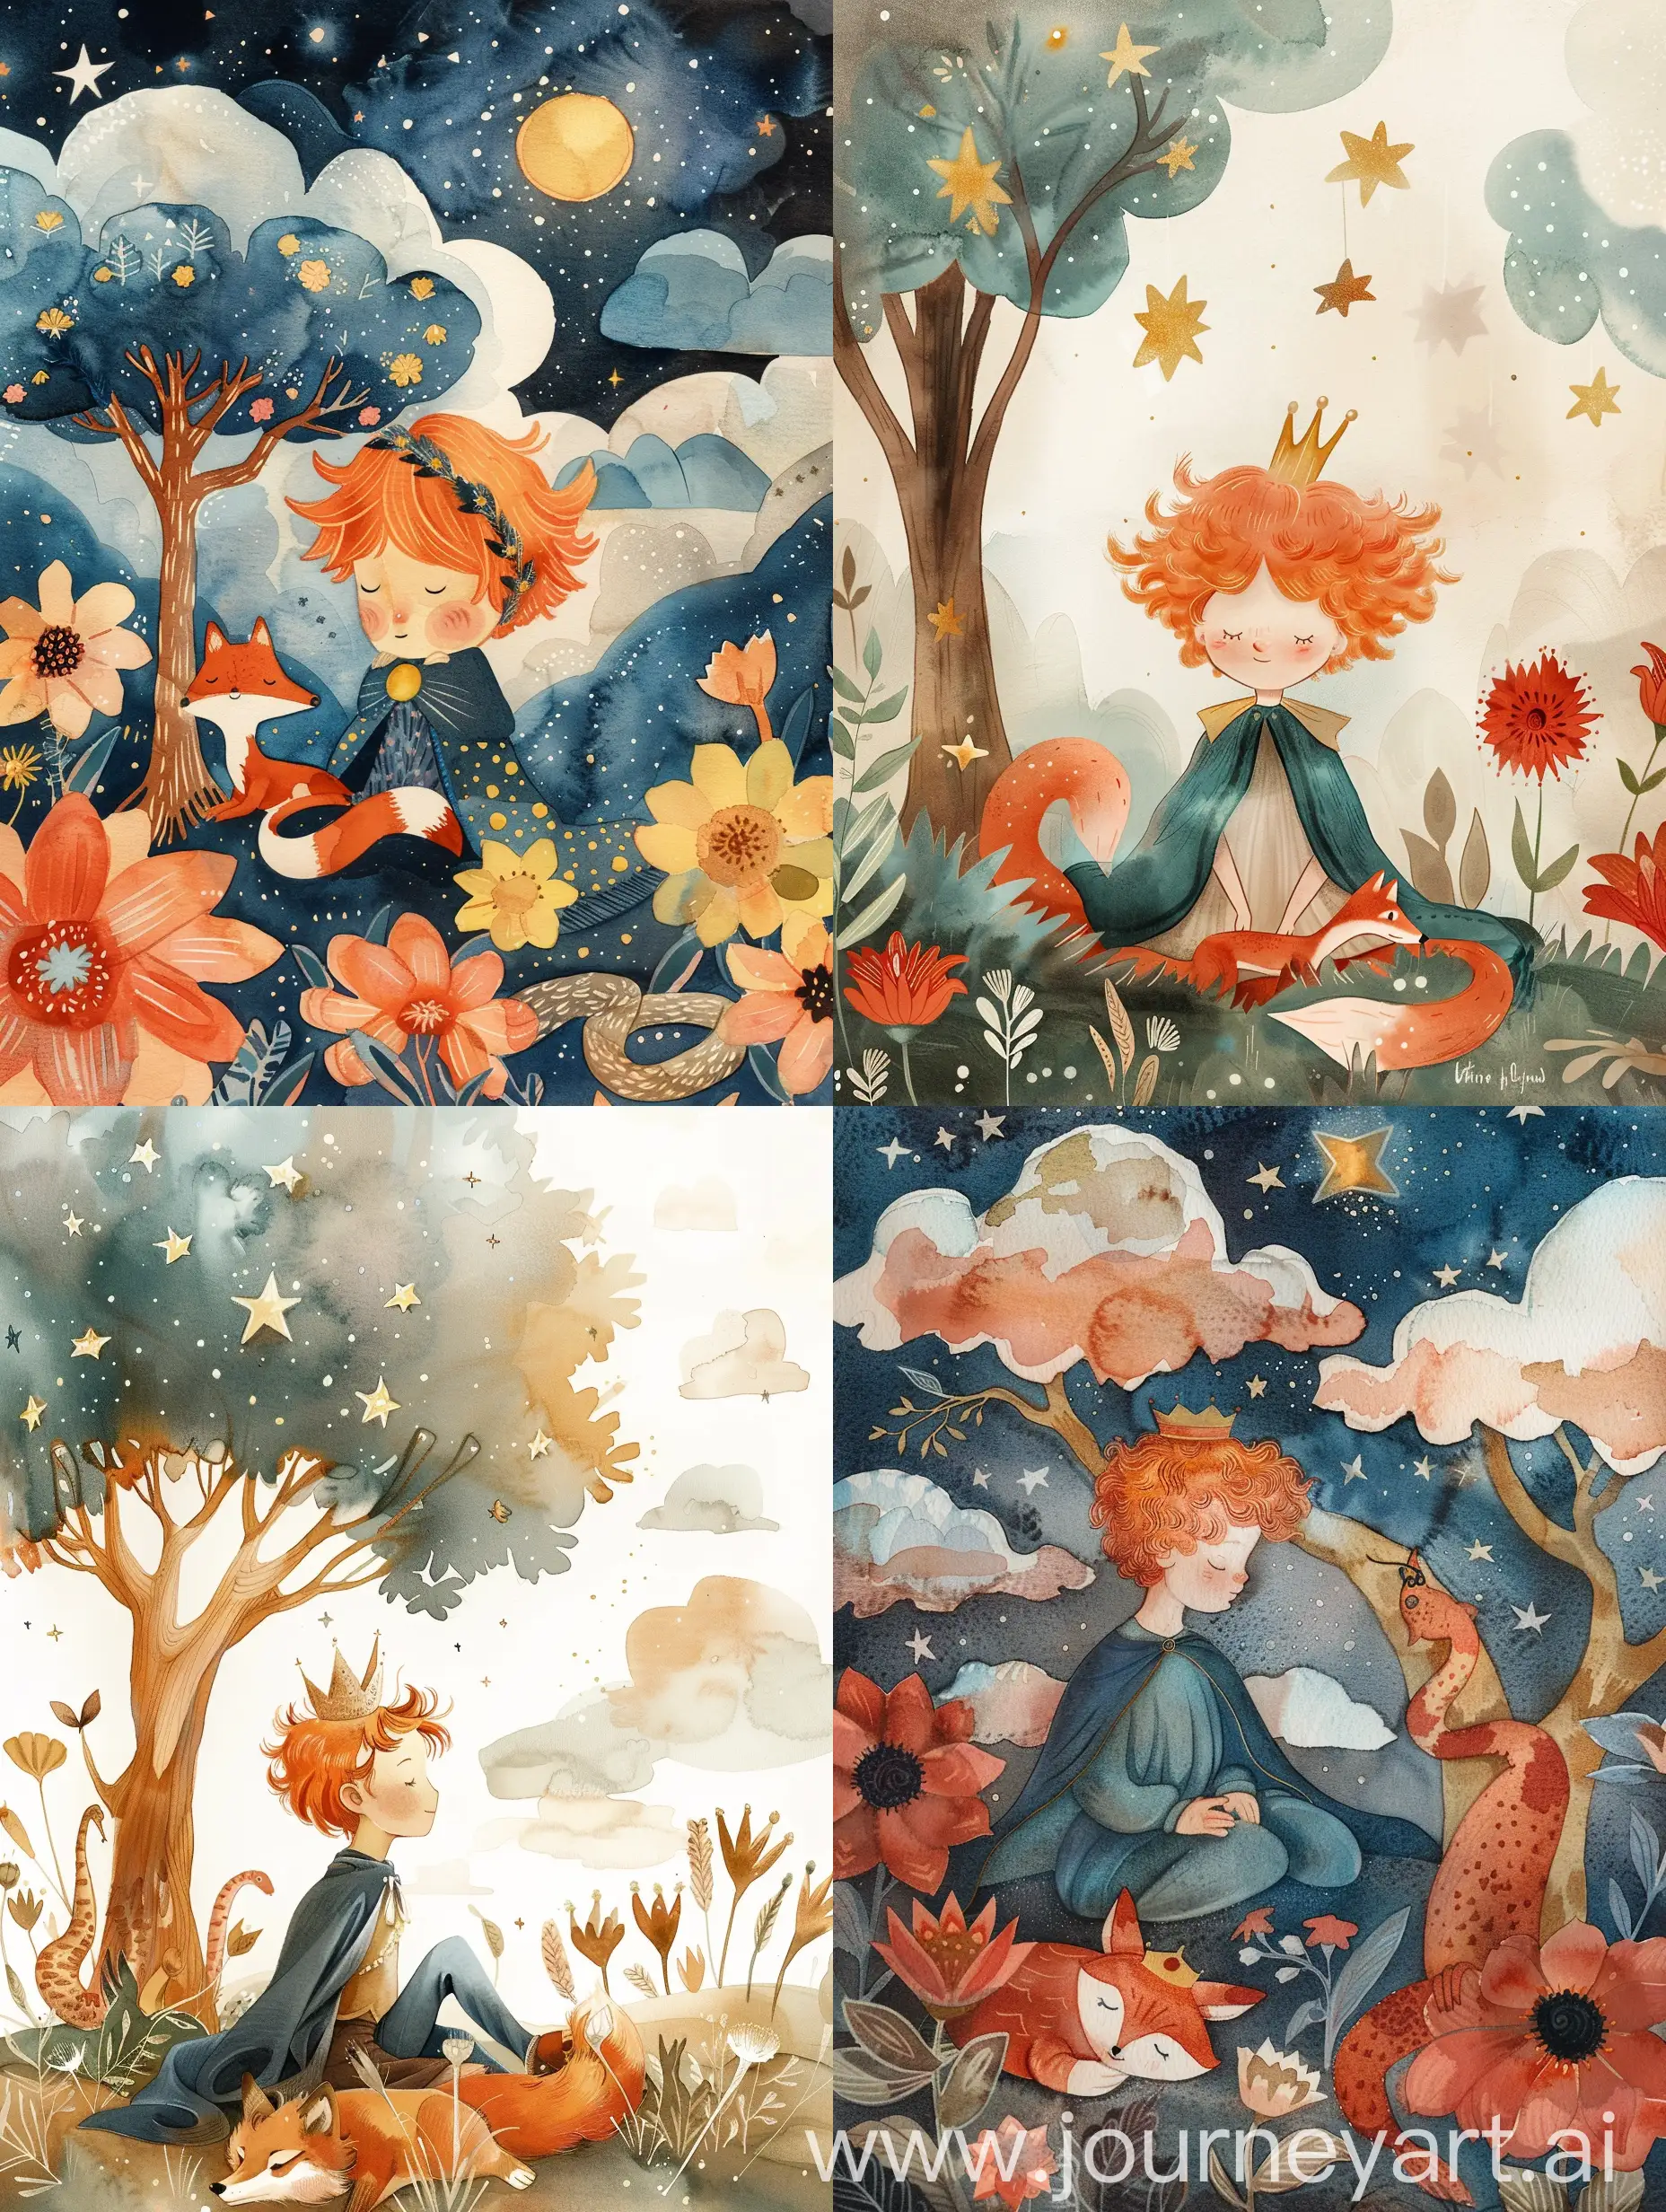 A whimsical watercolor illustration featuring a young boy with reddishorange hair styled in a tousled manner and a cute red fox. The boy is wearing a crown and a cape, sitting under a tree with a snake. The scene is surrounded by stars, fluffy clouds, and large flowers in warm hues. The background is dreamy, capturing a fairytale-like essence, with a peaceful and magical atmosphere.